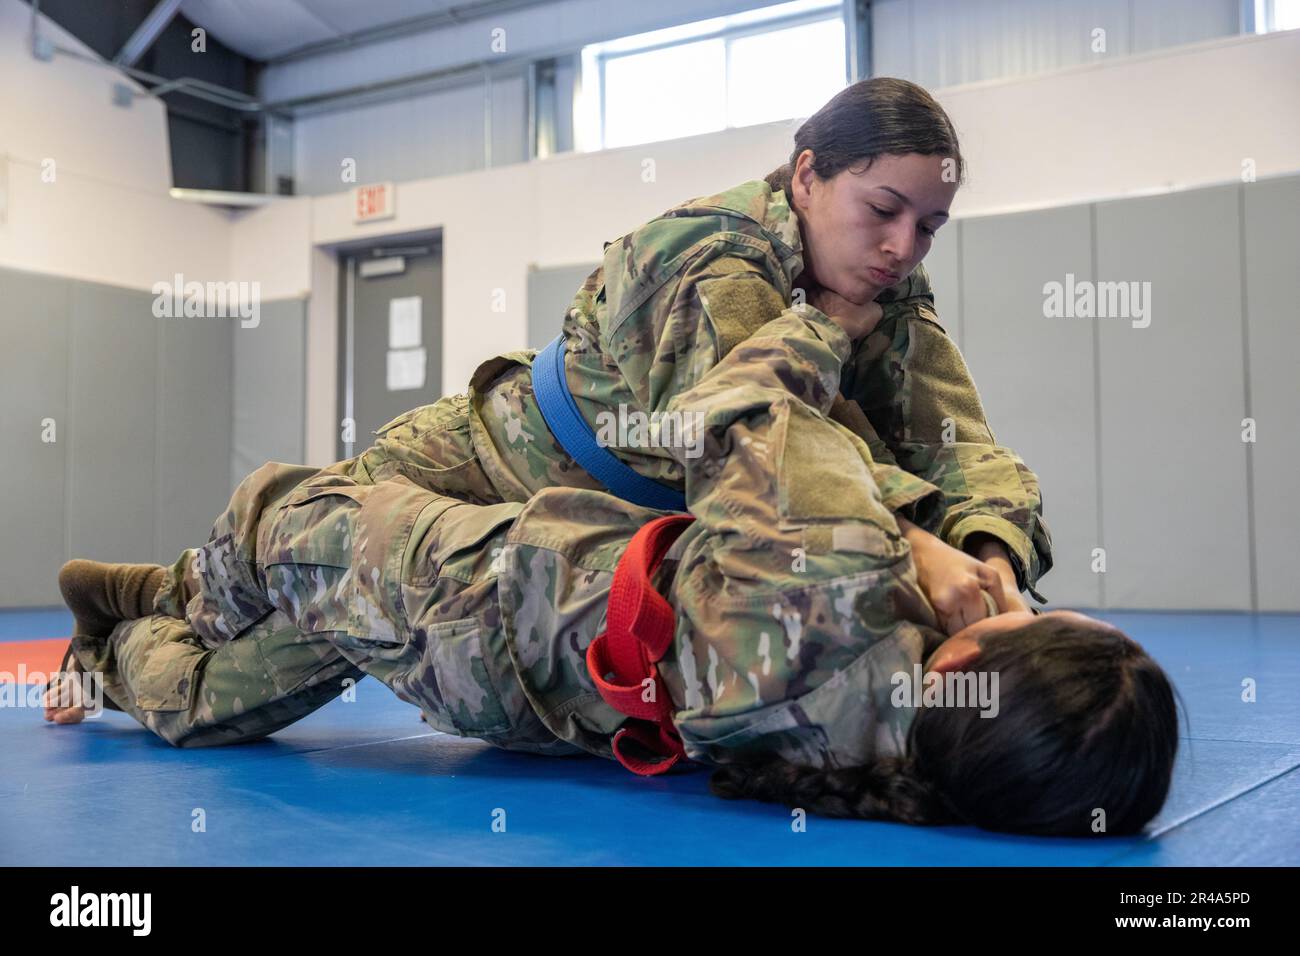 Spc. Erika Mena, a Soldier with 716th Military Police Battalion, executes a collar choke on Spc. Elena Guevara, a Soldier with 91st Military Police Battalion, at the 10th Mountain Division combatives facility on Fort Drum, N.Y., March 9, 2023. This event was conducted as part of a best squad competition designed to assess Soldiers on technical and tactical proficiency and teamwork. Stock Photo